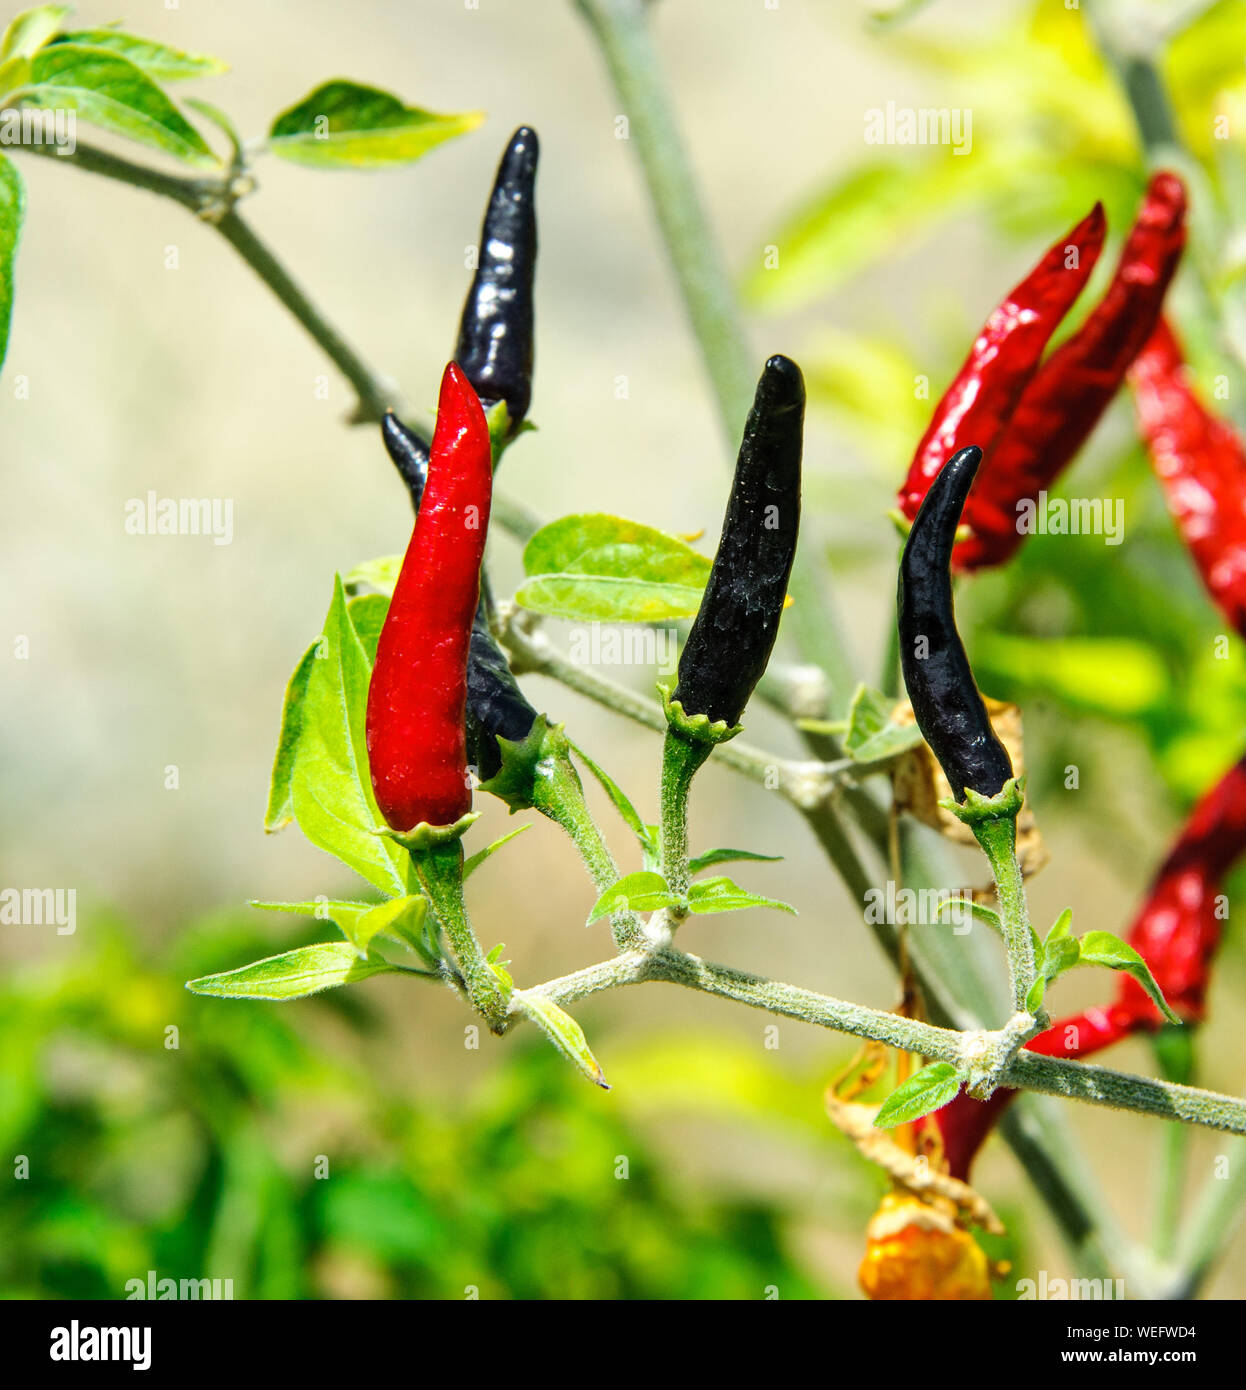 Close-up Of Black And Red Chili Peppers On Plant Stock Photo - Alamy